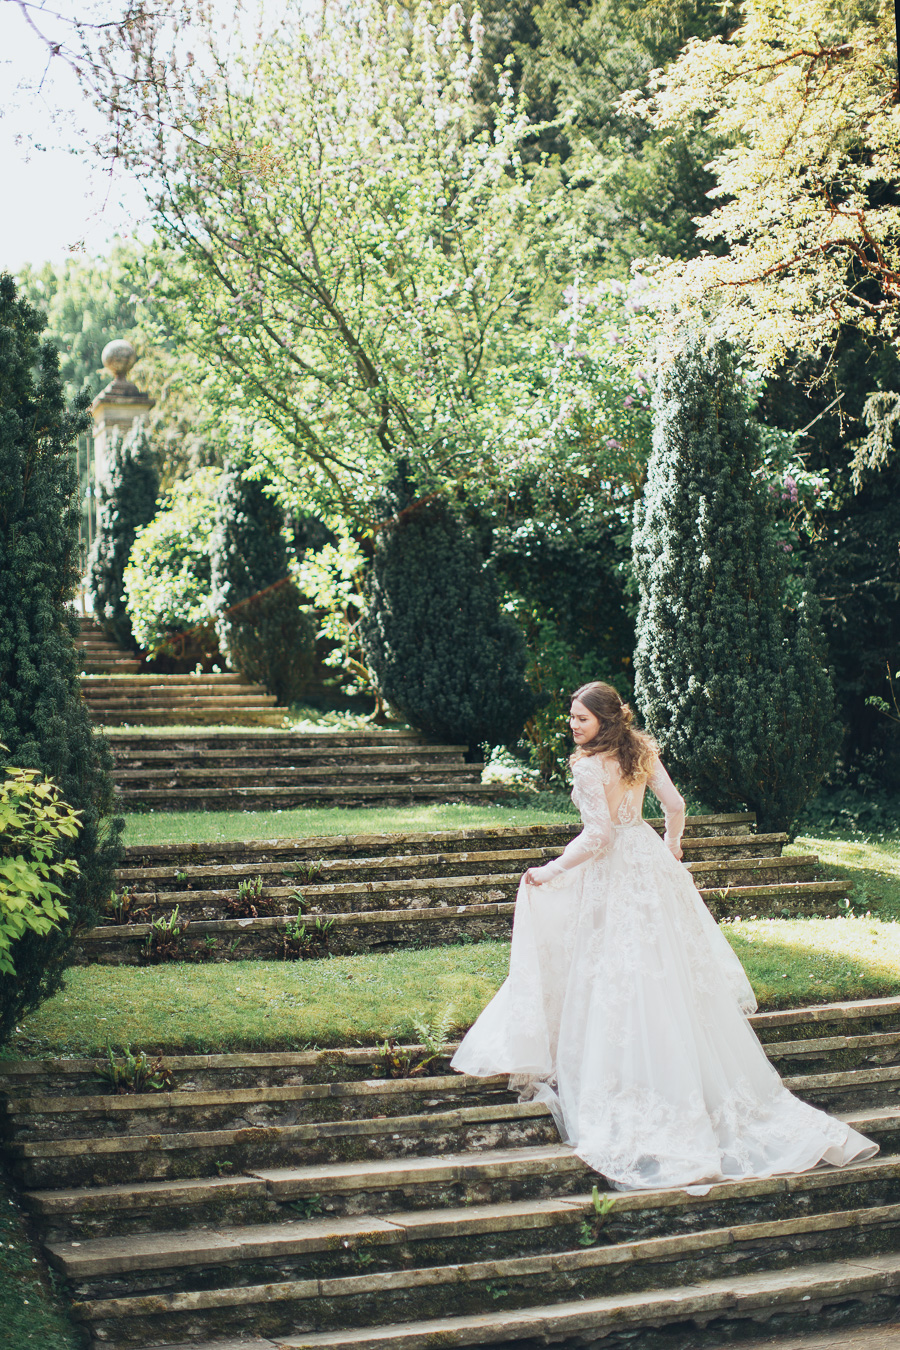 Plan an intimate Cotswolds wedding for two